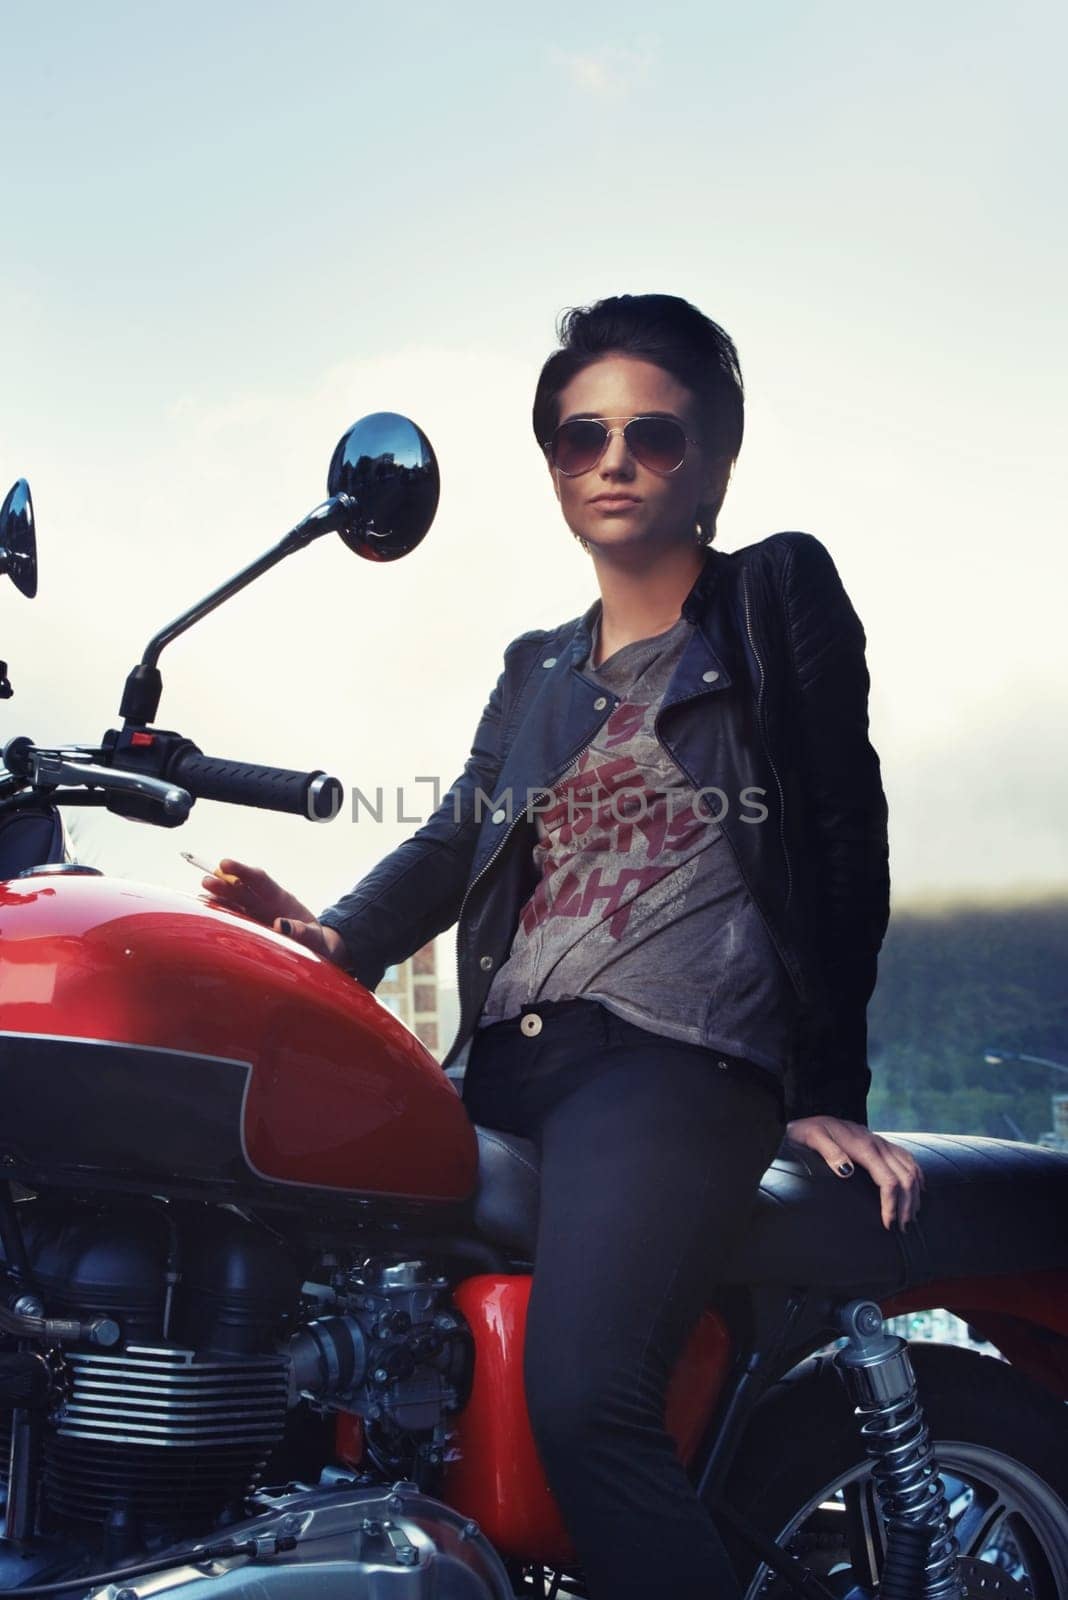 Motorcycle, leather and rebel woman in city with sunglasses for travel, transport or road trip. Fashion, evening and person with attitude on classic or vintage bike for transportation or journey by YuriArcurs